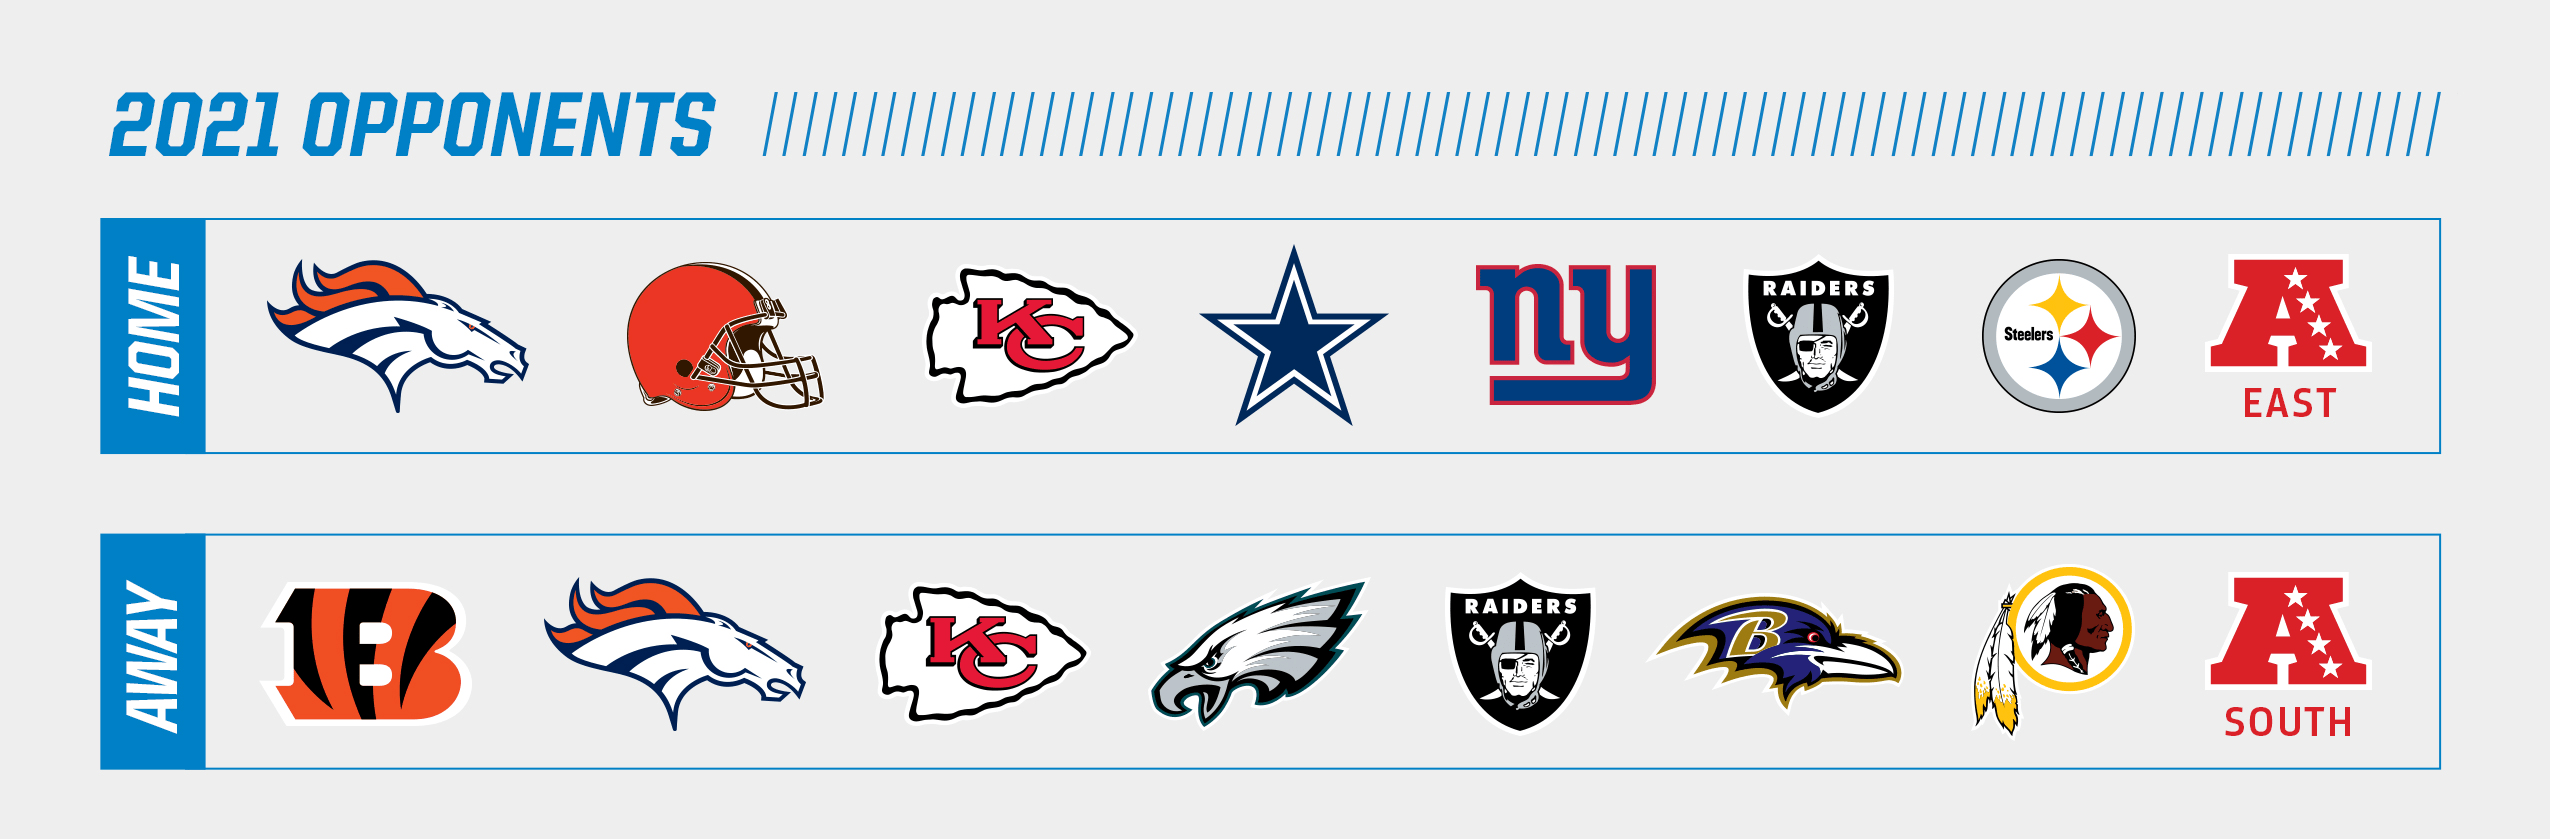 Chargers Future Opponents | Los Angeles Chargers - chargers.com